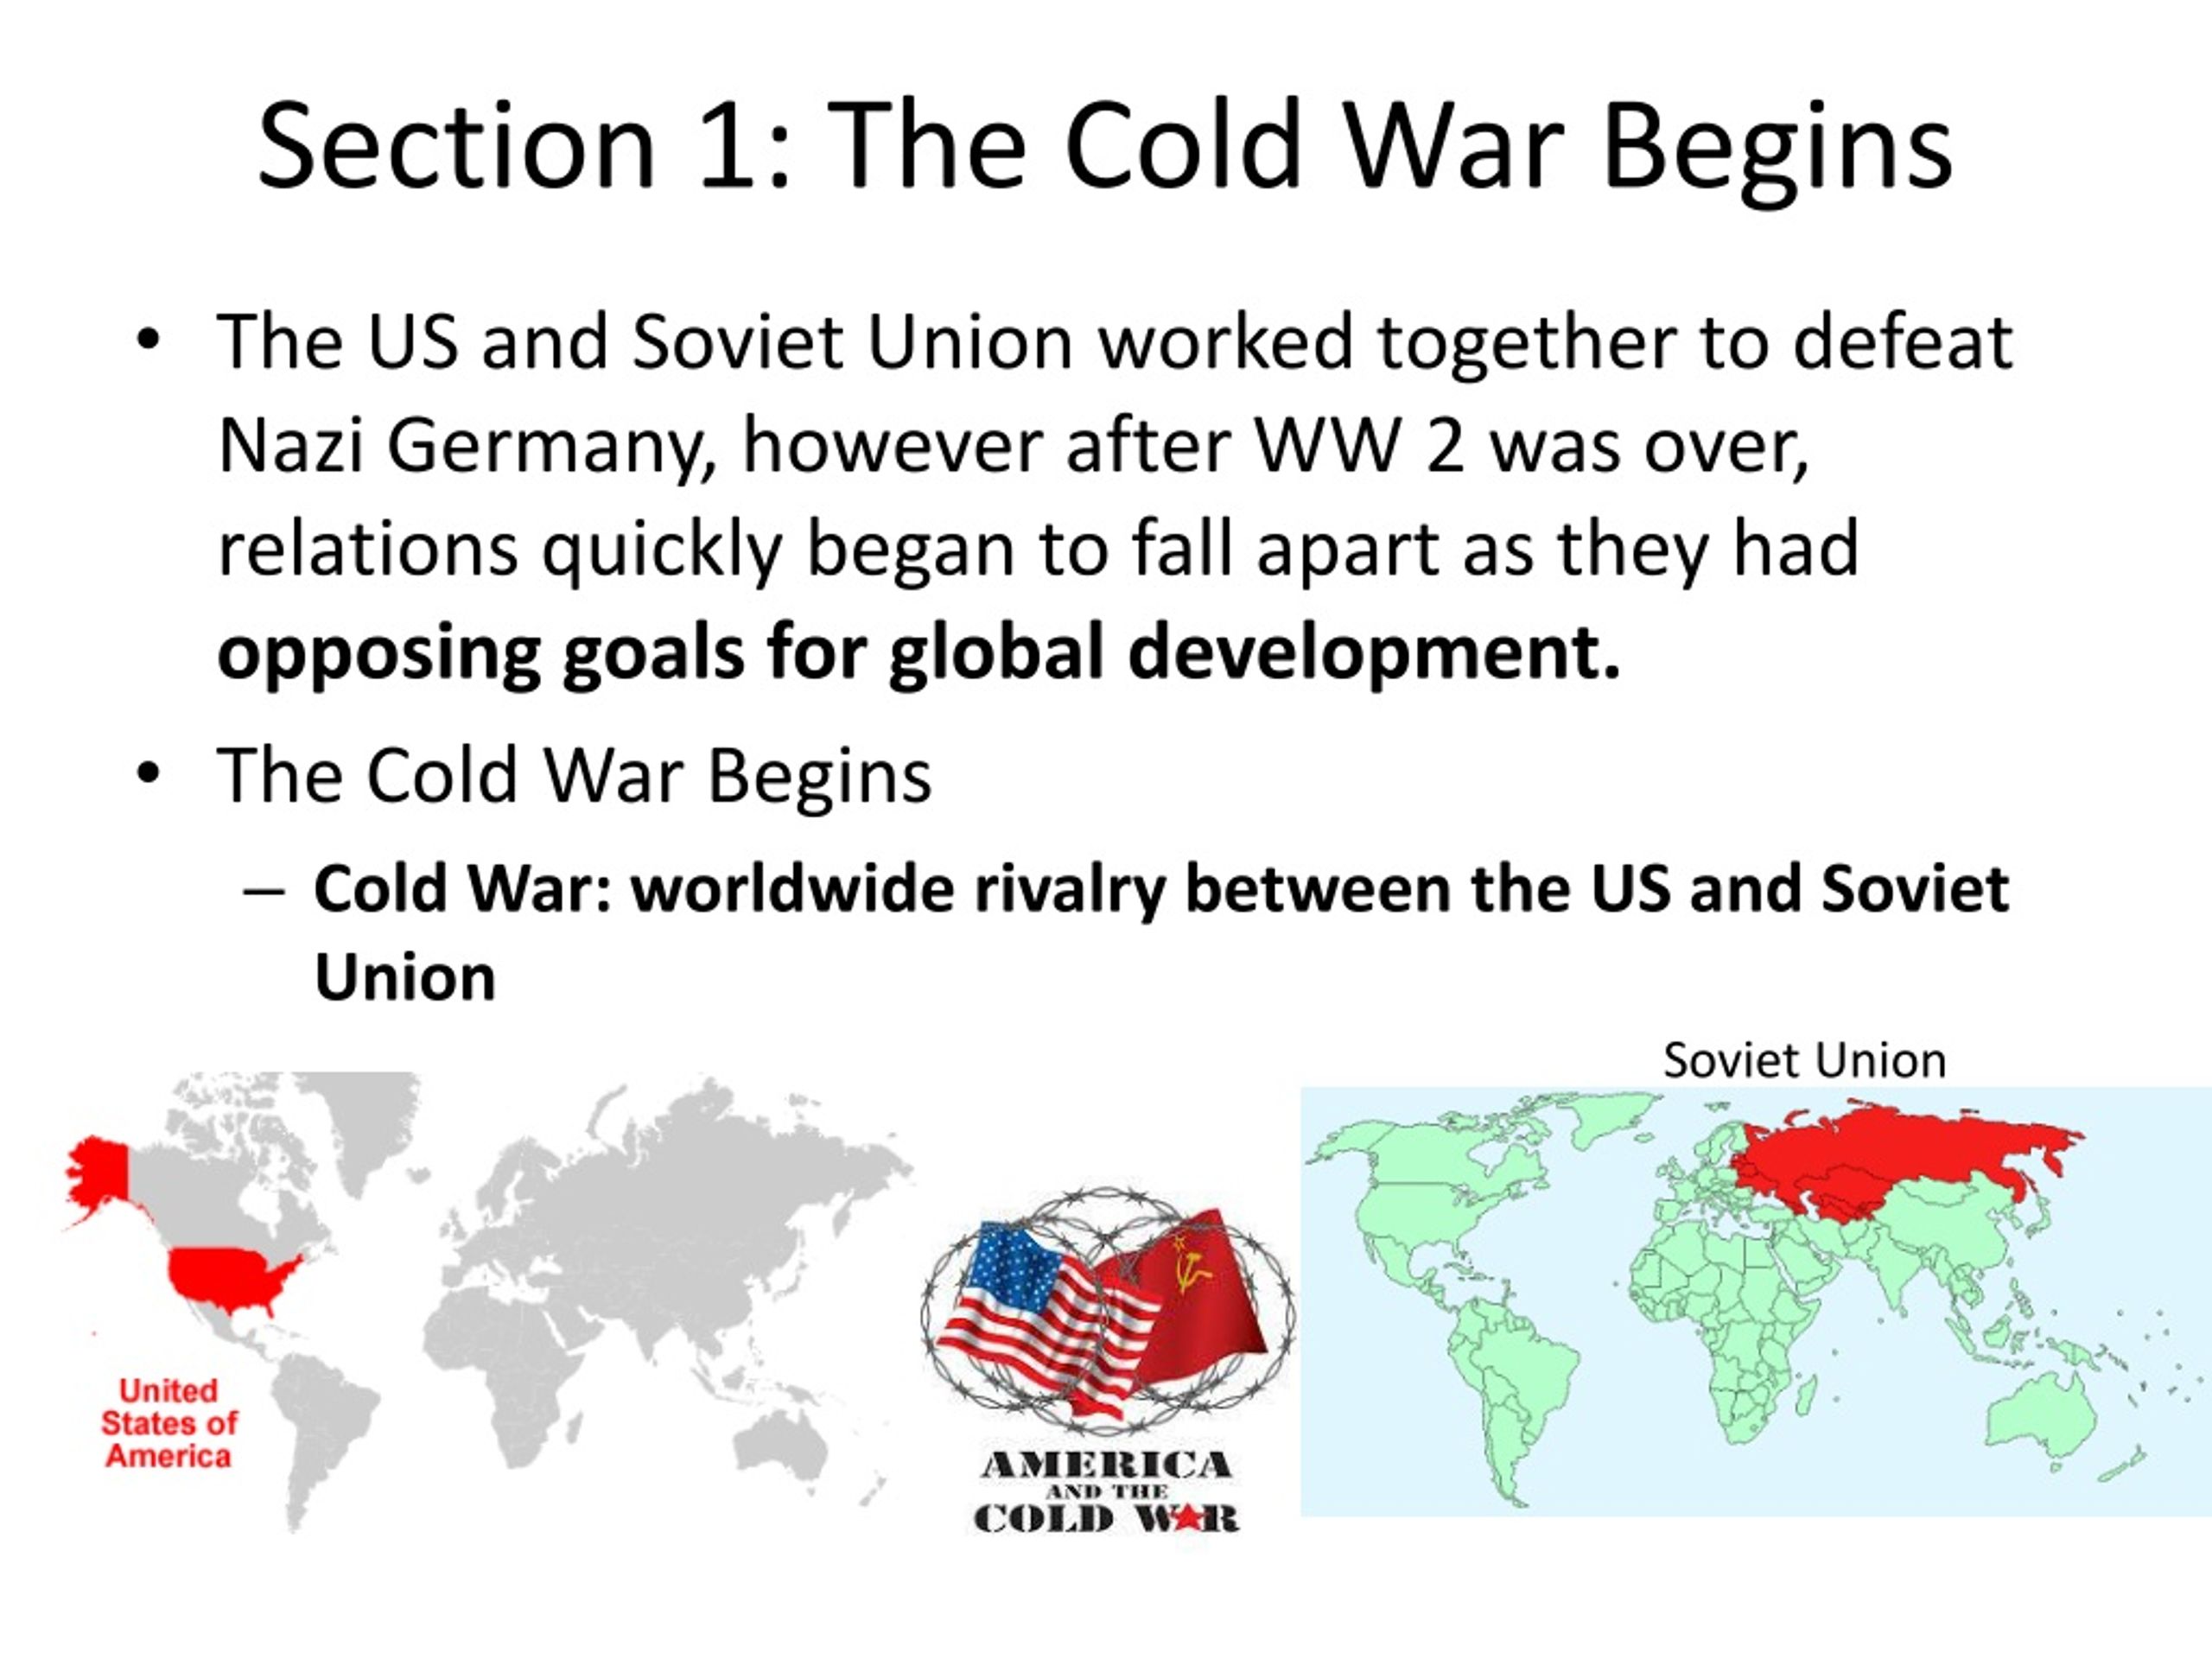 why was is called the cold war